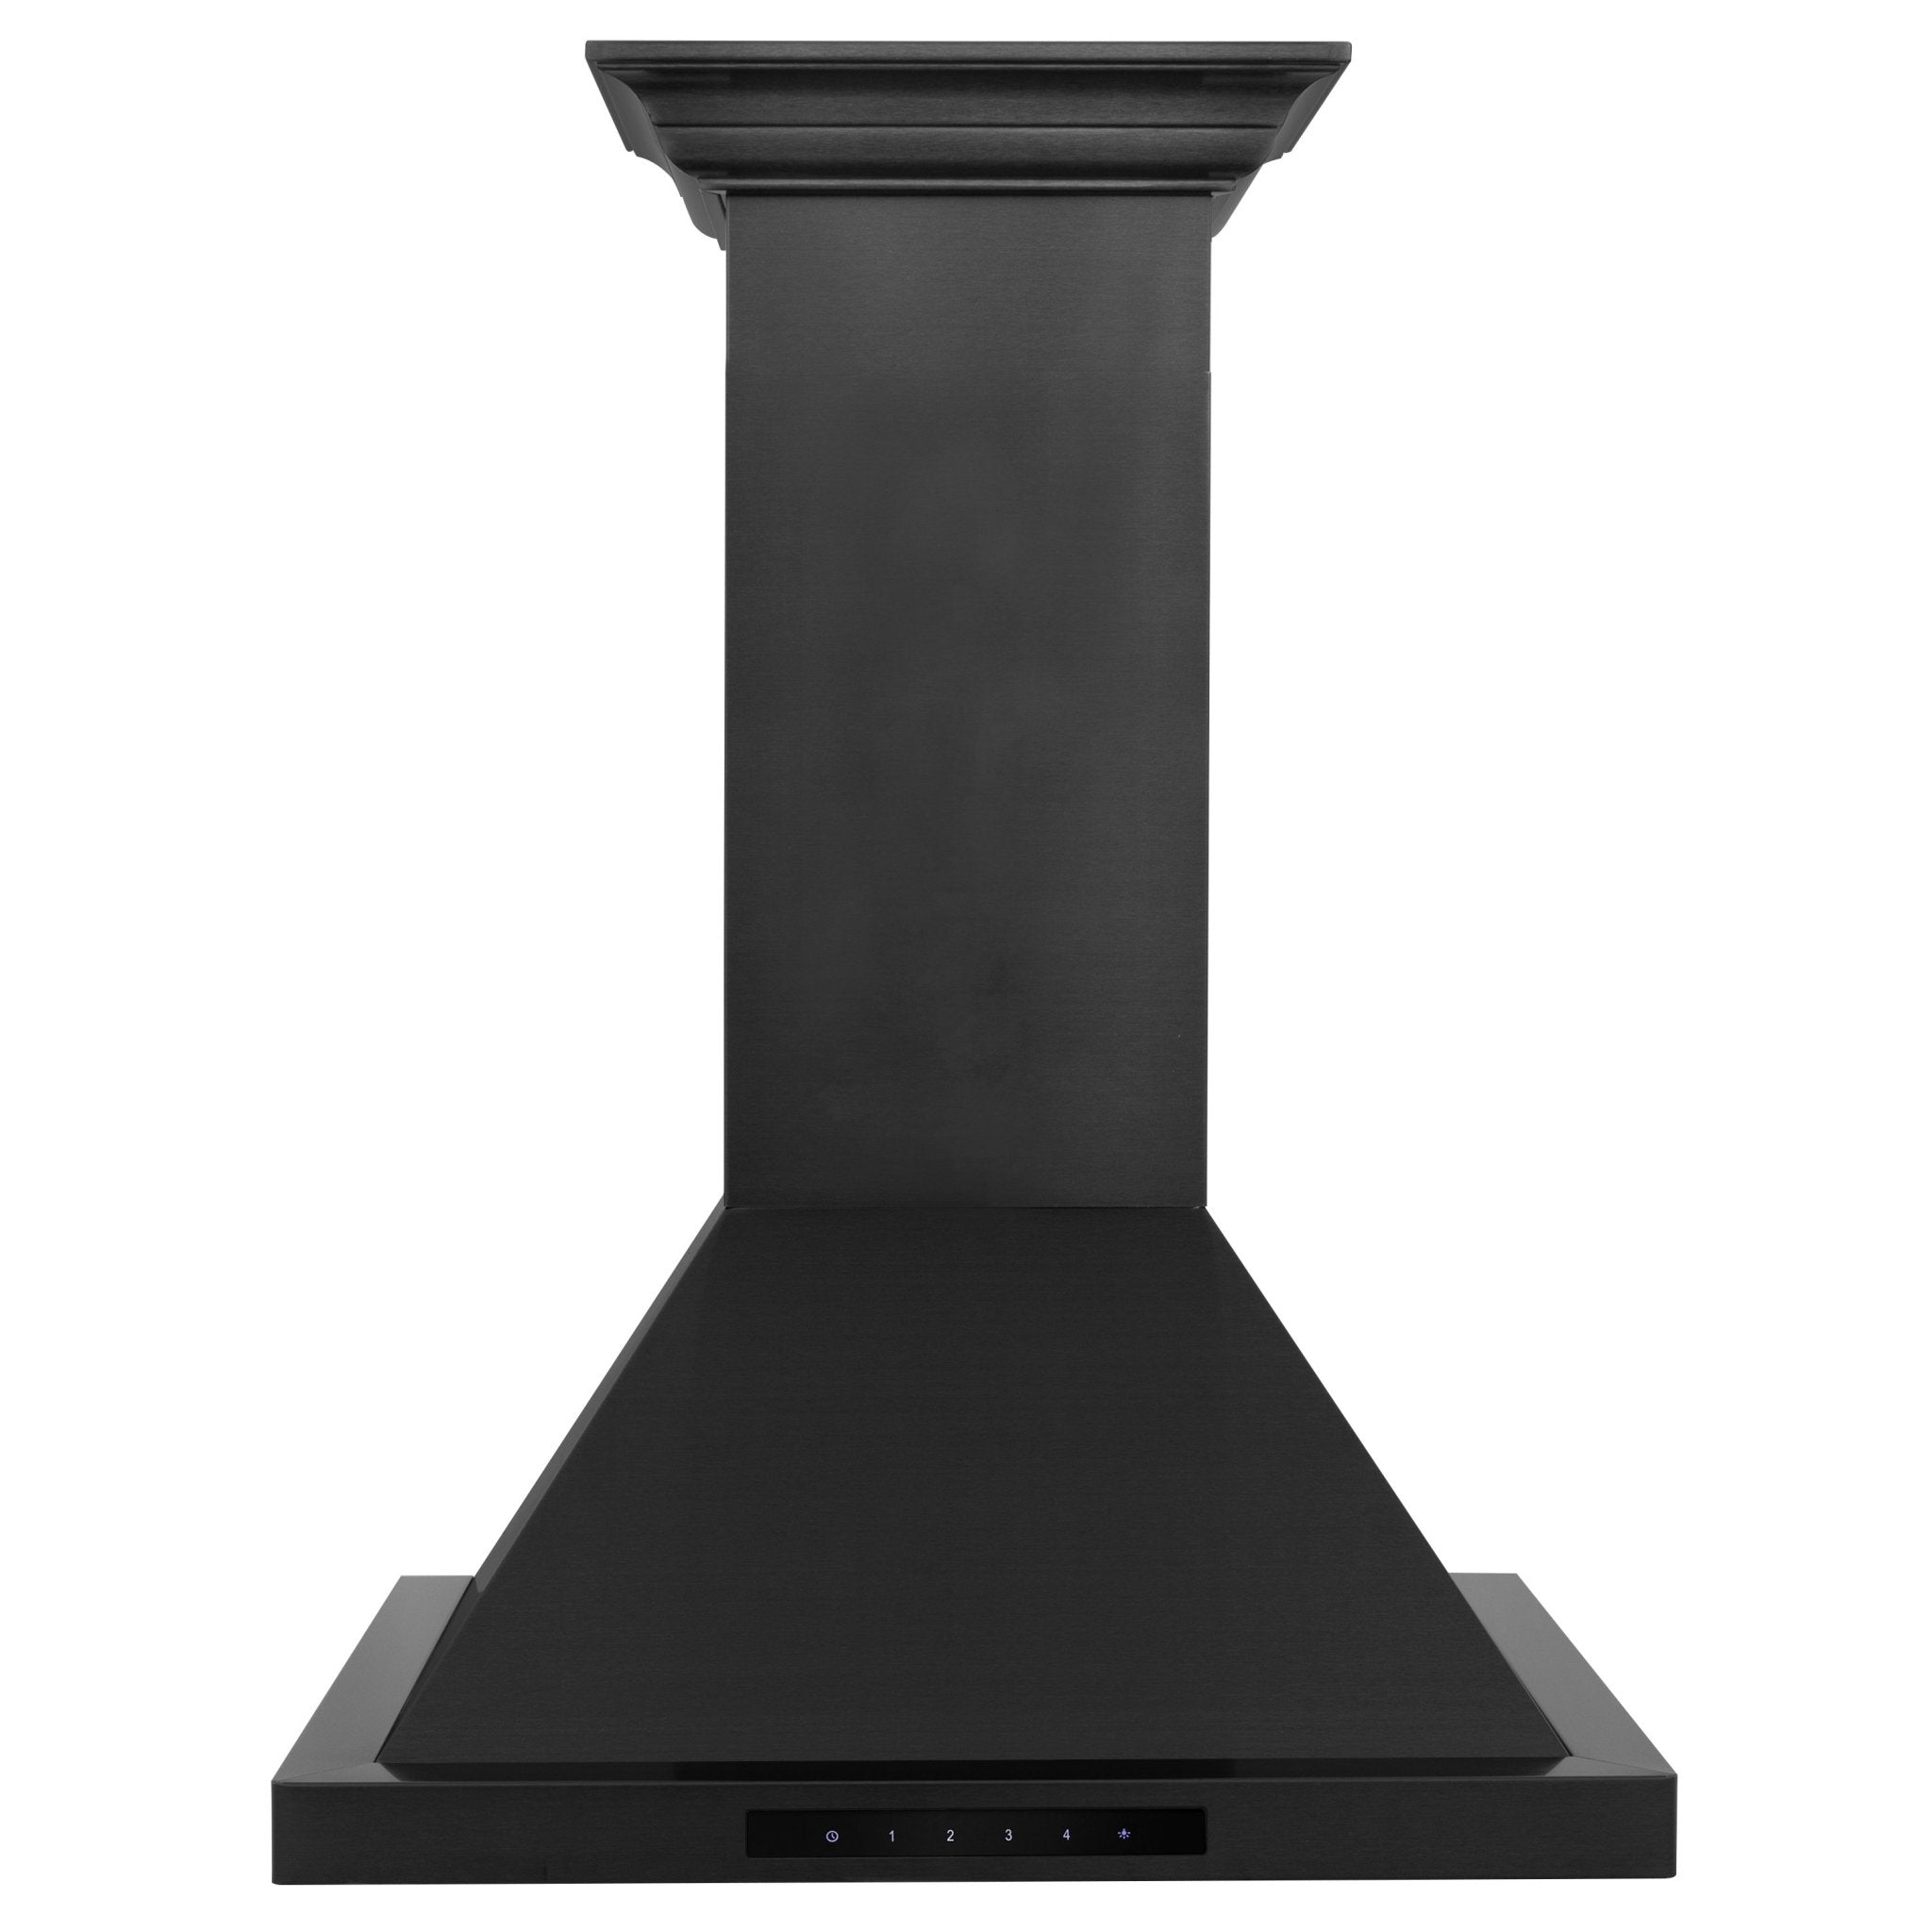 ZLINE Convertible Vent Wall Mount Range Hood in Black Stainless Steel with Crown Molding - BSKBNCRN-24